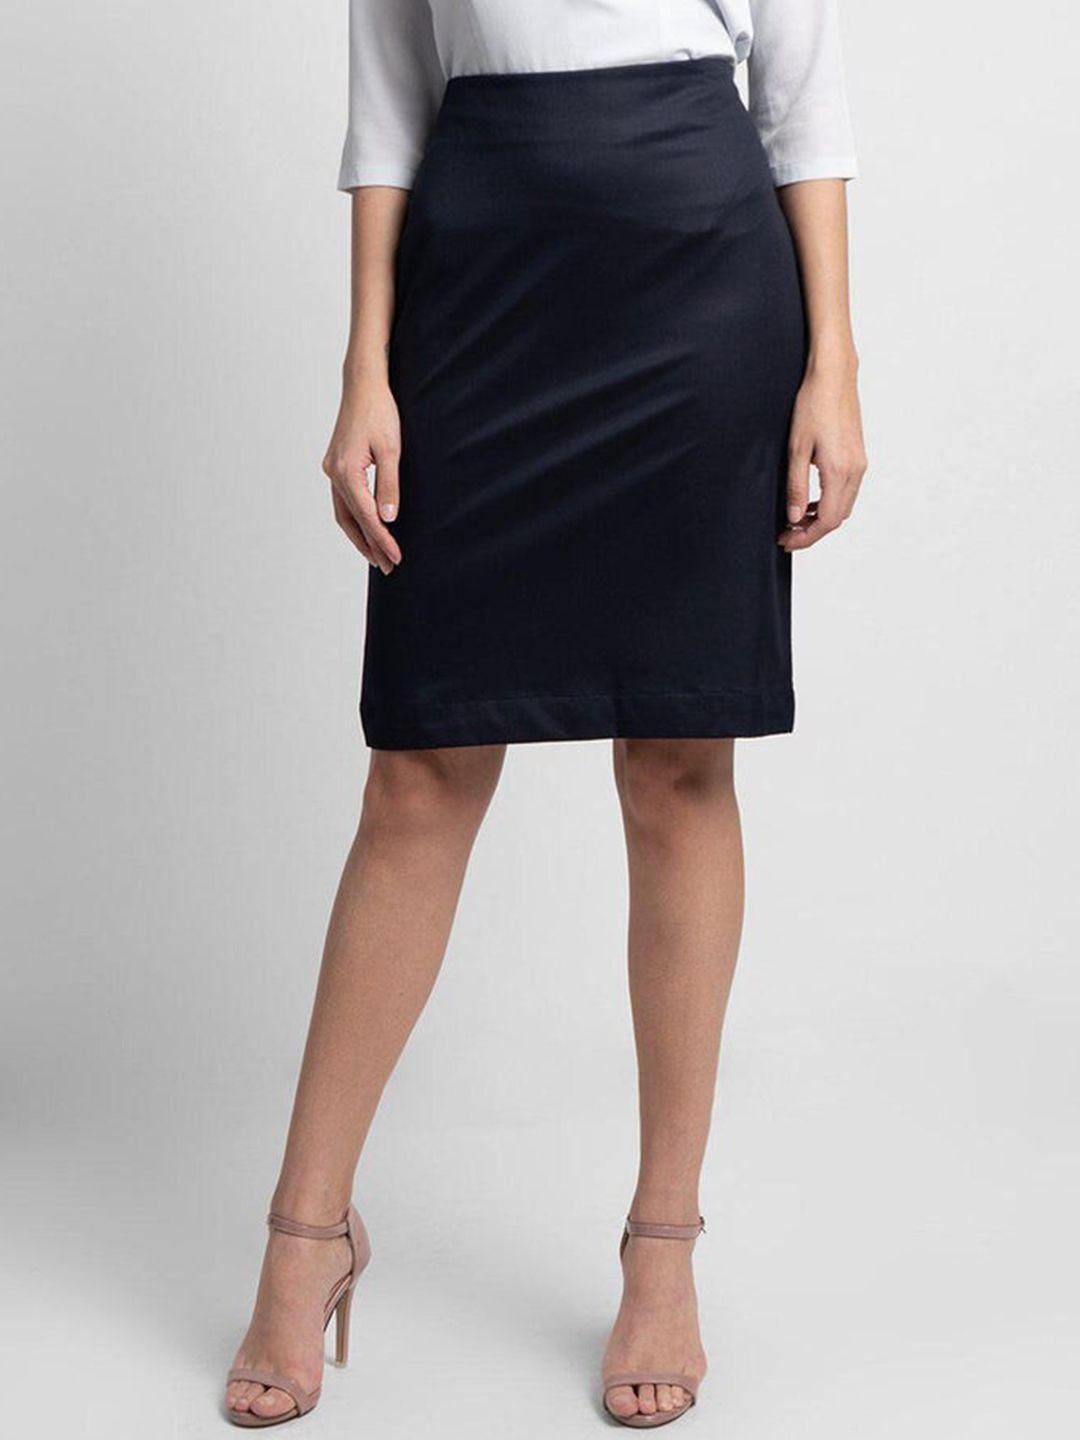 powersutra women navy blue solid above knee length skirts